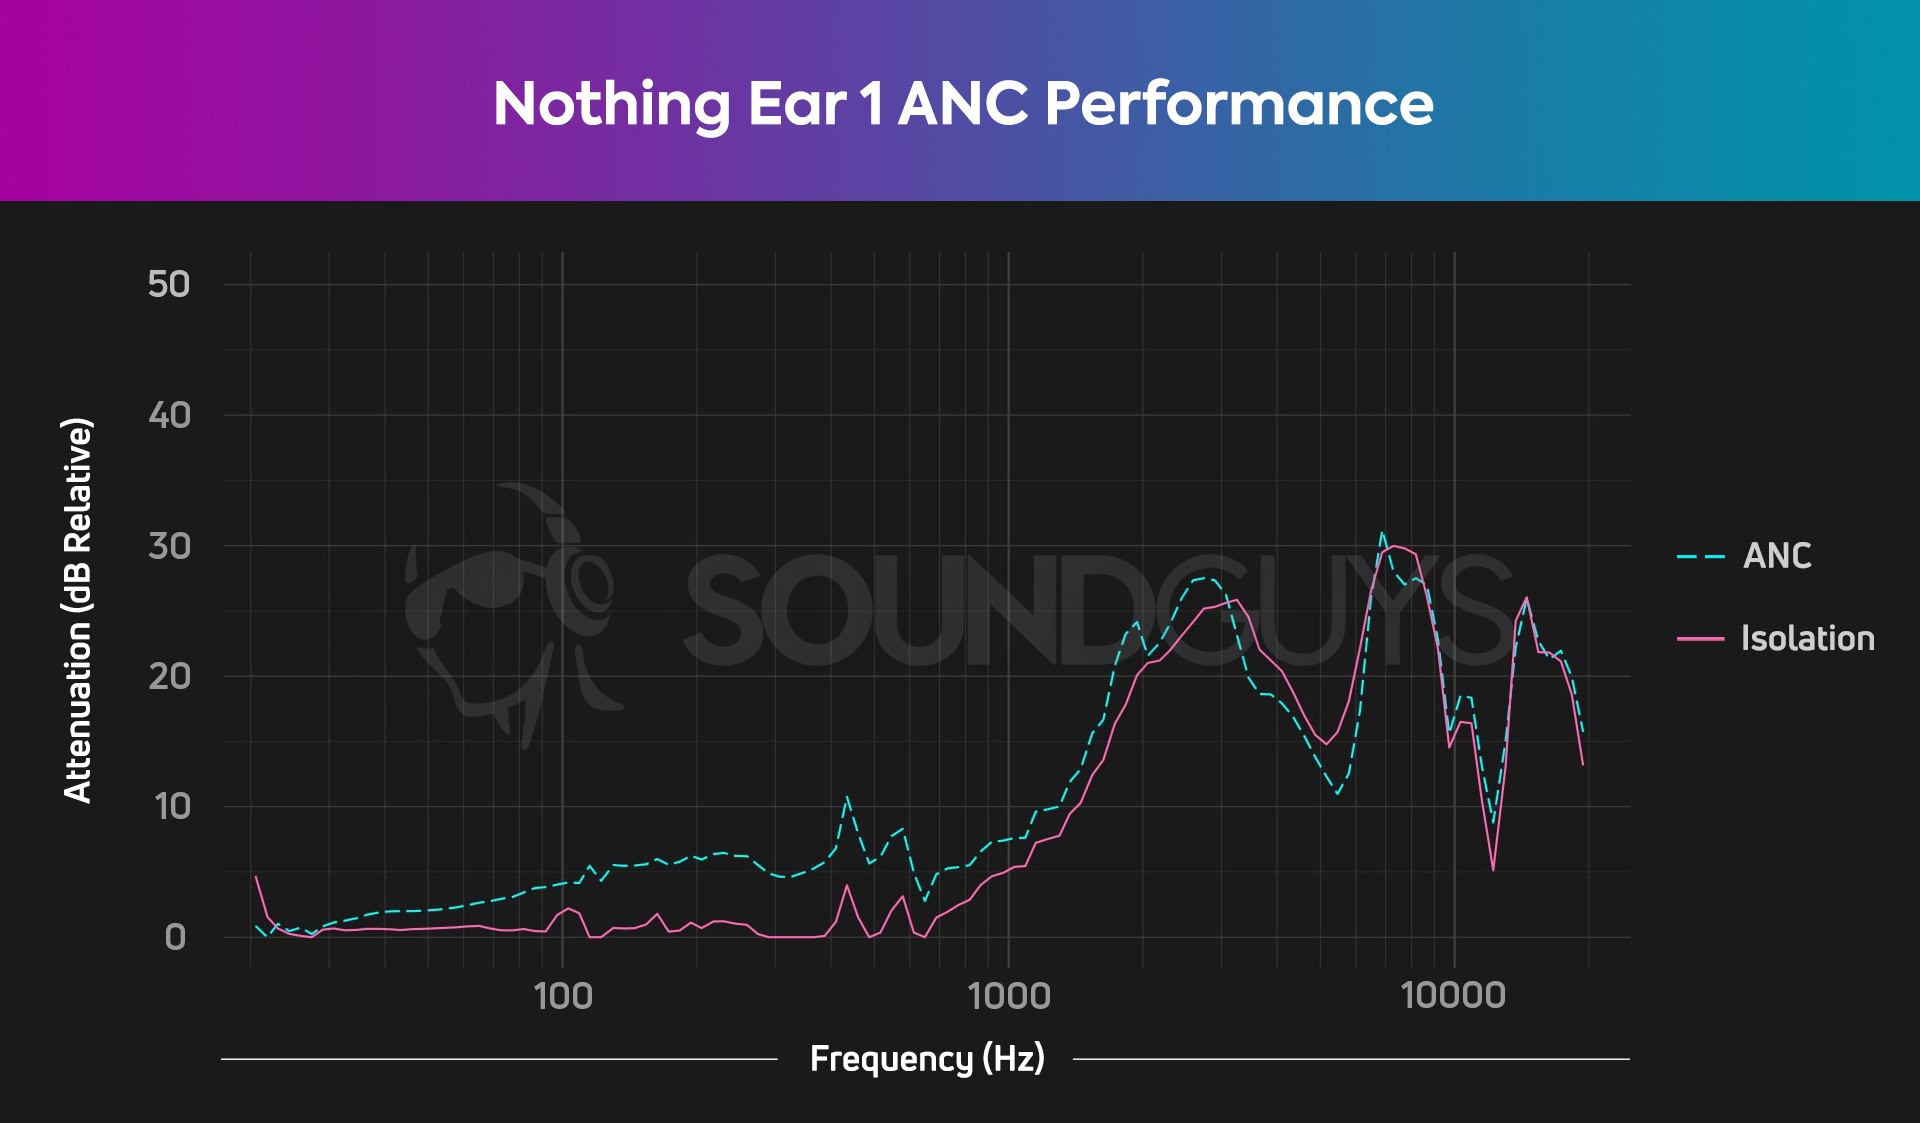 The graph shows the mediocre noise reduction performance of Nothing Ear 1.